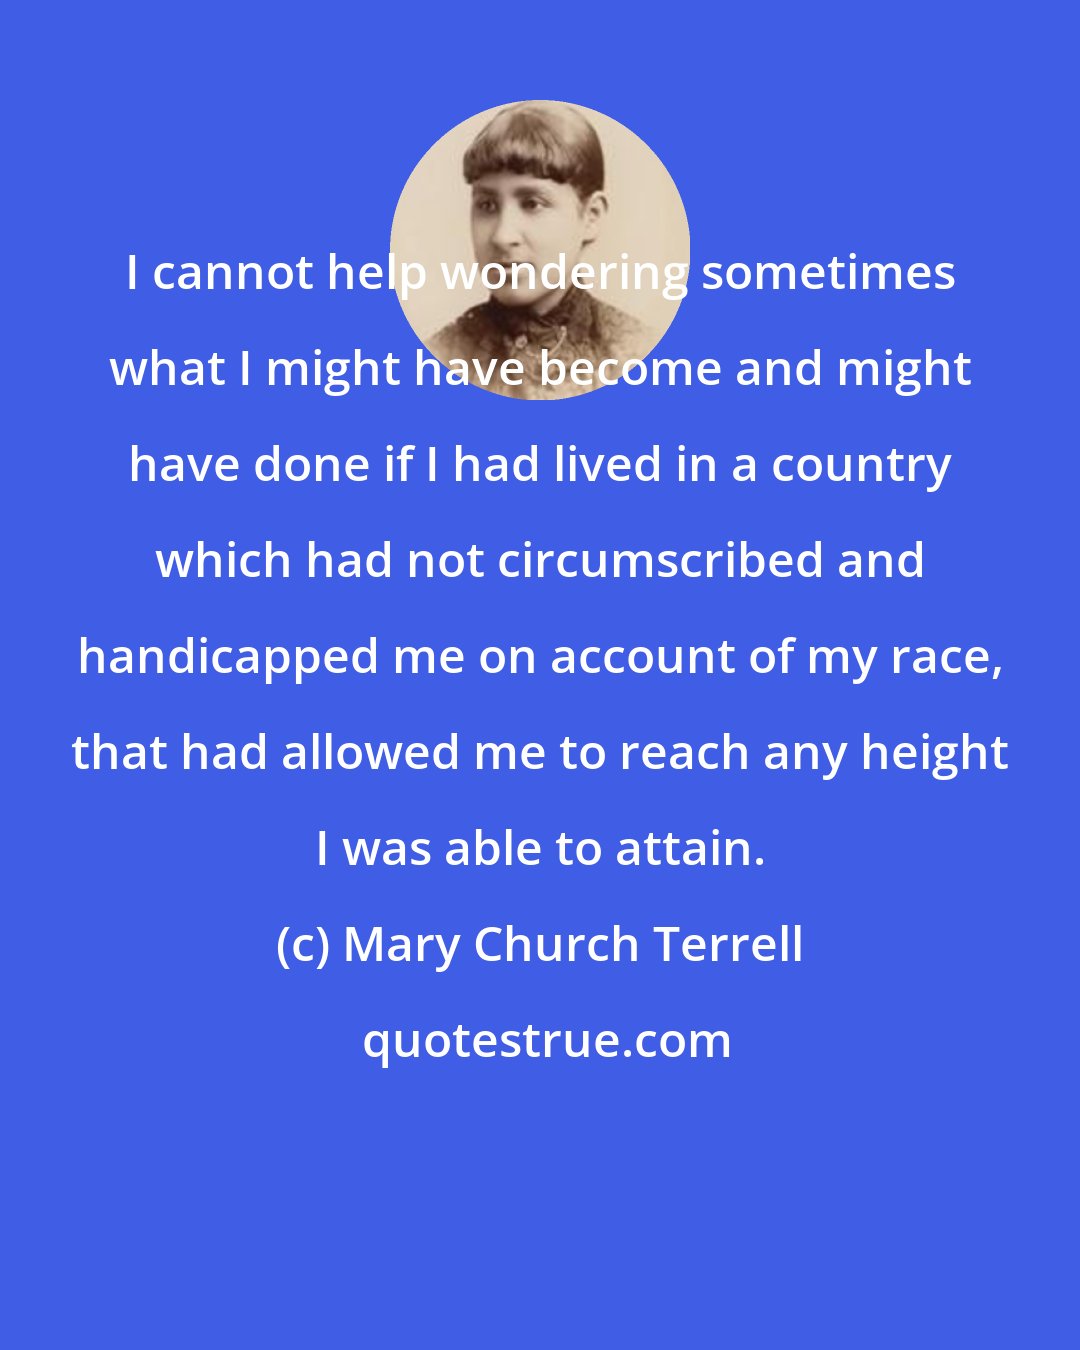 Mary Church Terrell: I cannot help wondering sometimes what I might have become and might have done if I had lived in a country which had not circumscribed and handicapped me on account of my race, that had allowed me to reach any height I was able to attain.